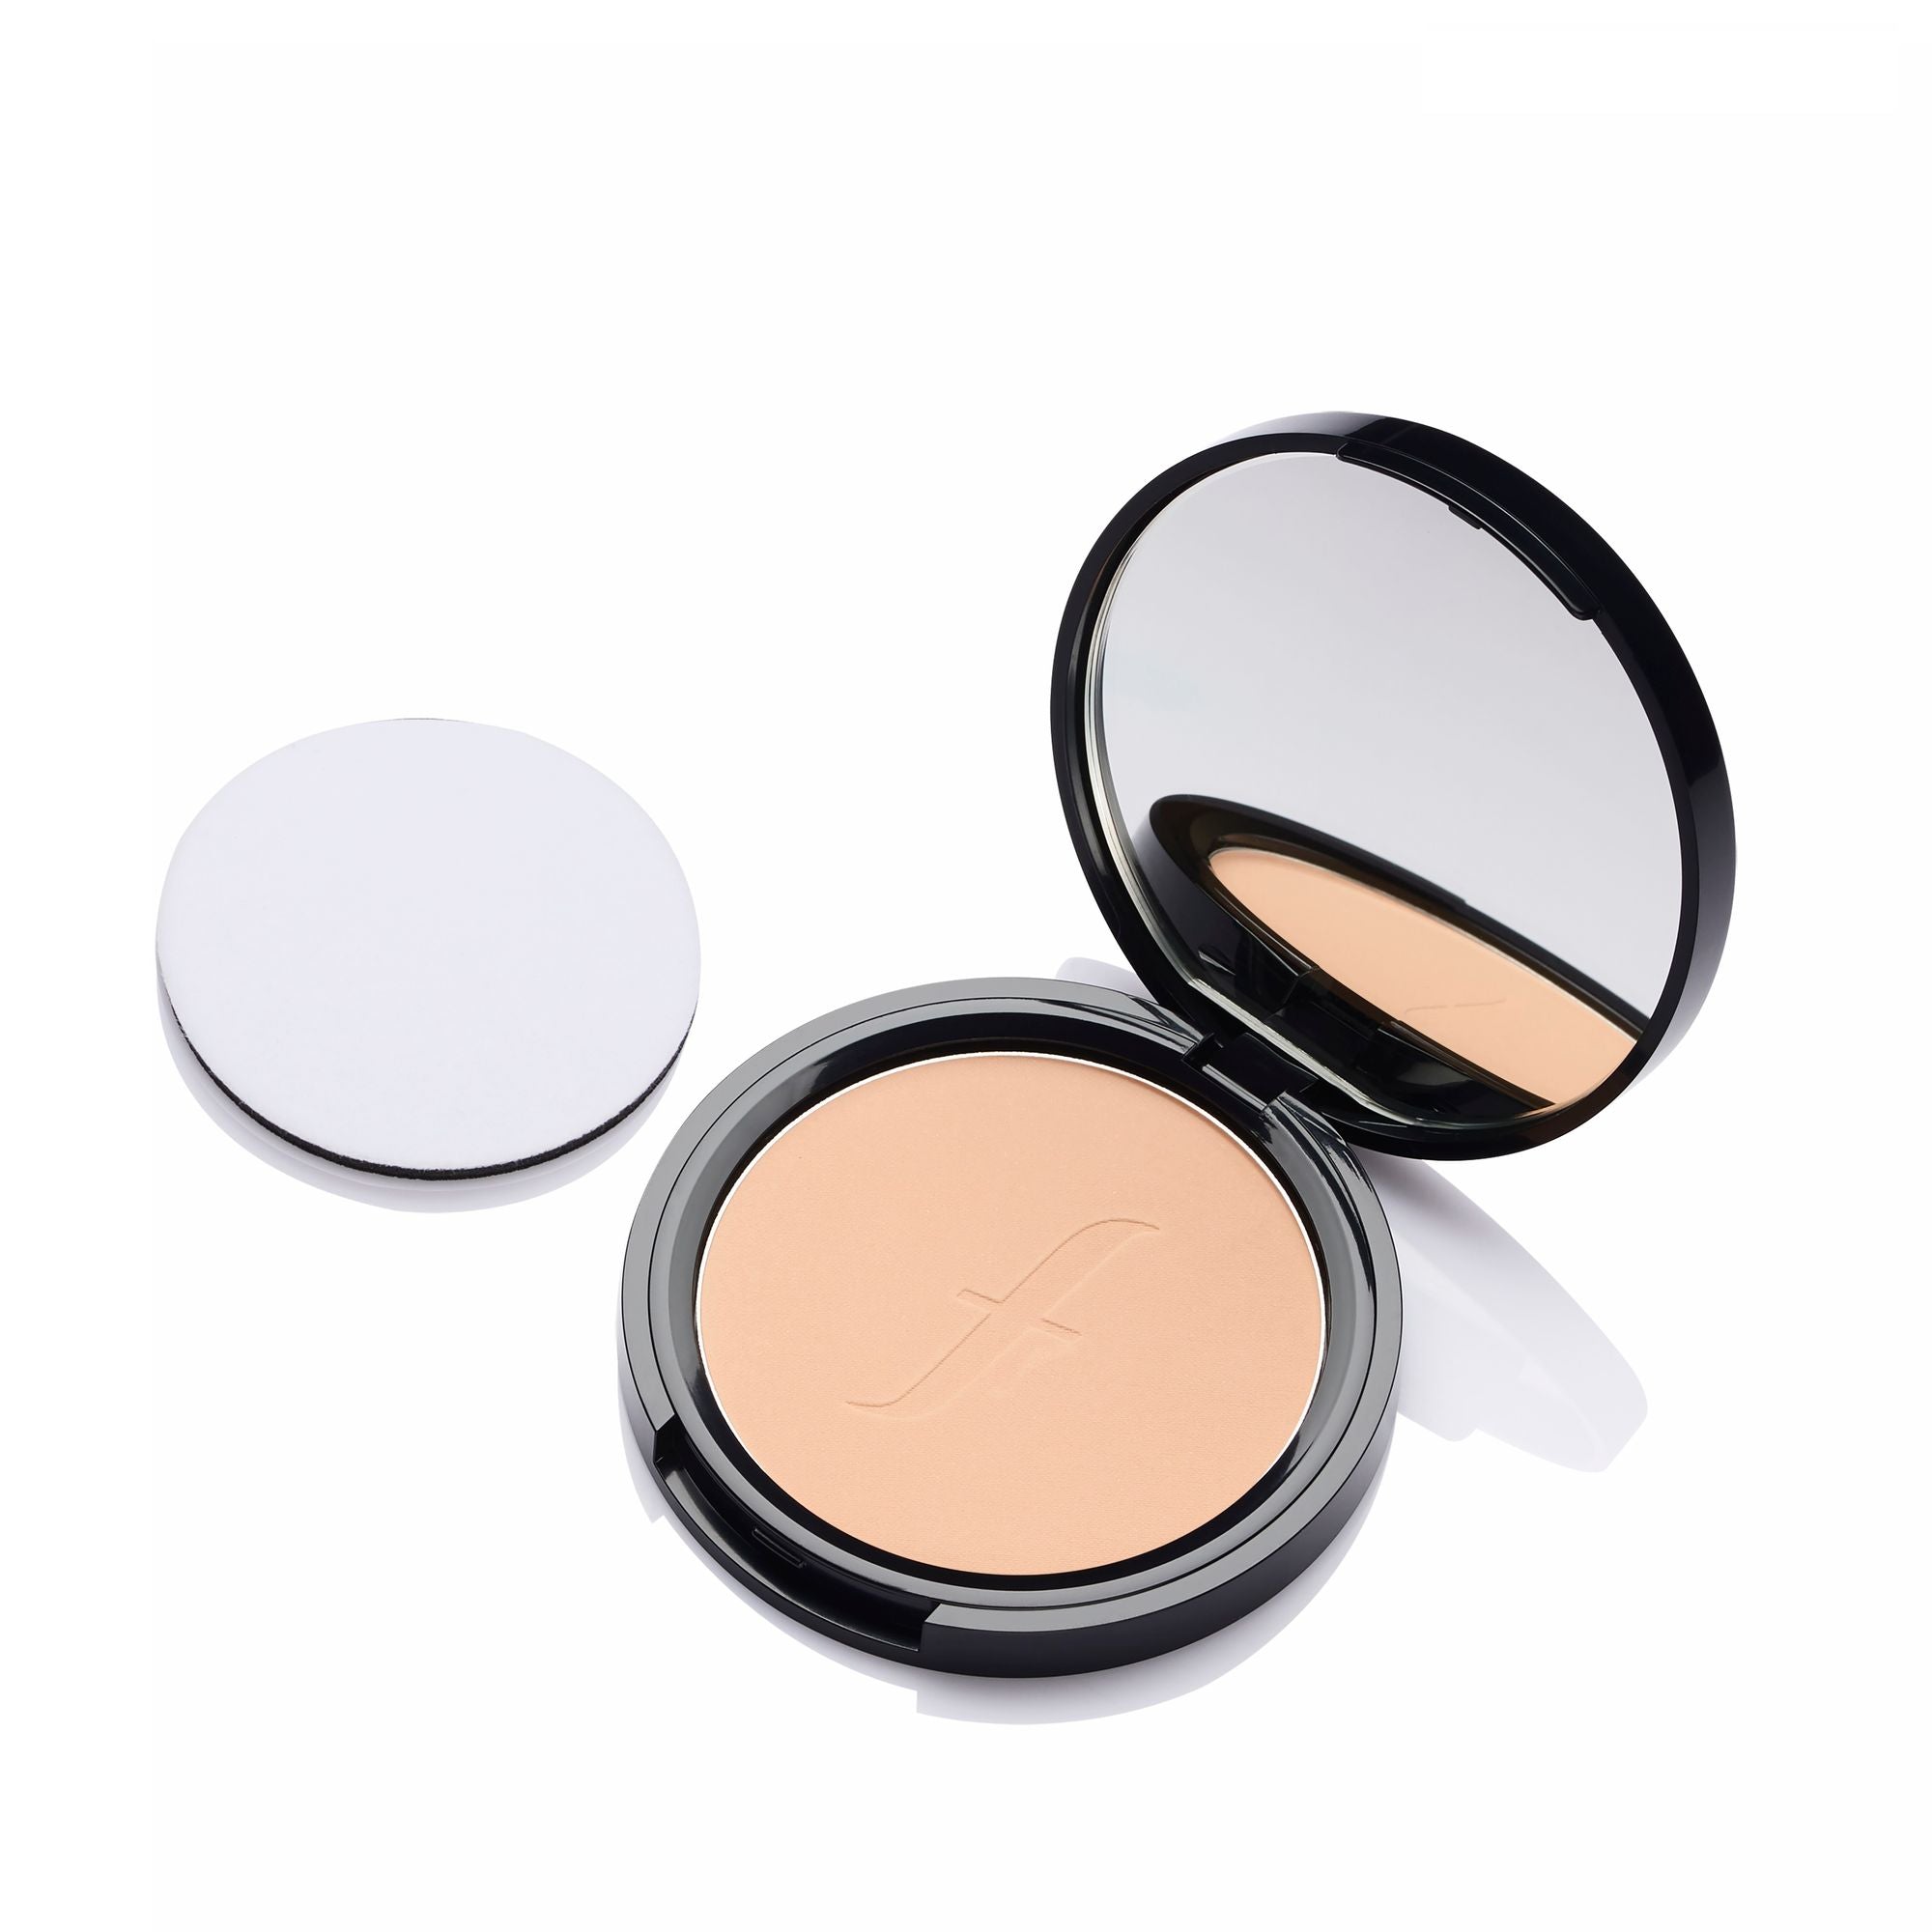 Faces-Canada-Weightless-Stay-Matte-Compact-SPF20-Vitamin-E-Shea-Butter-9g Faces-Canada